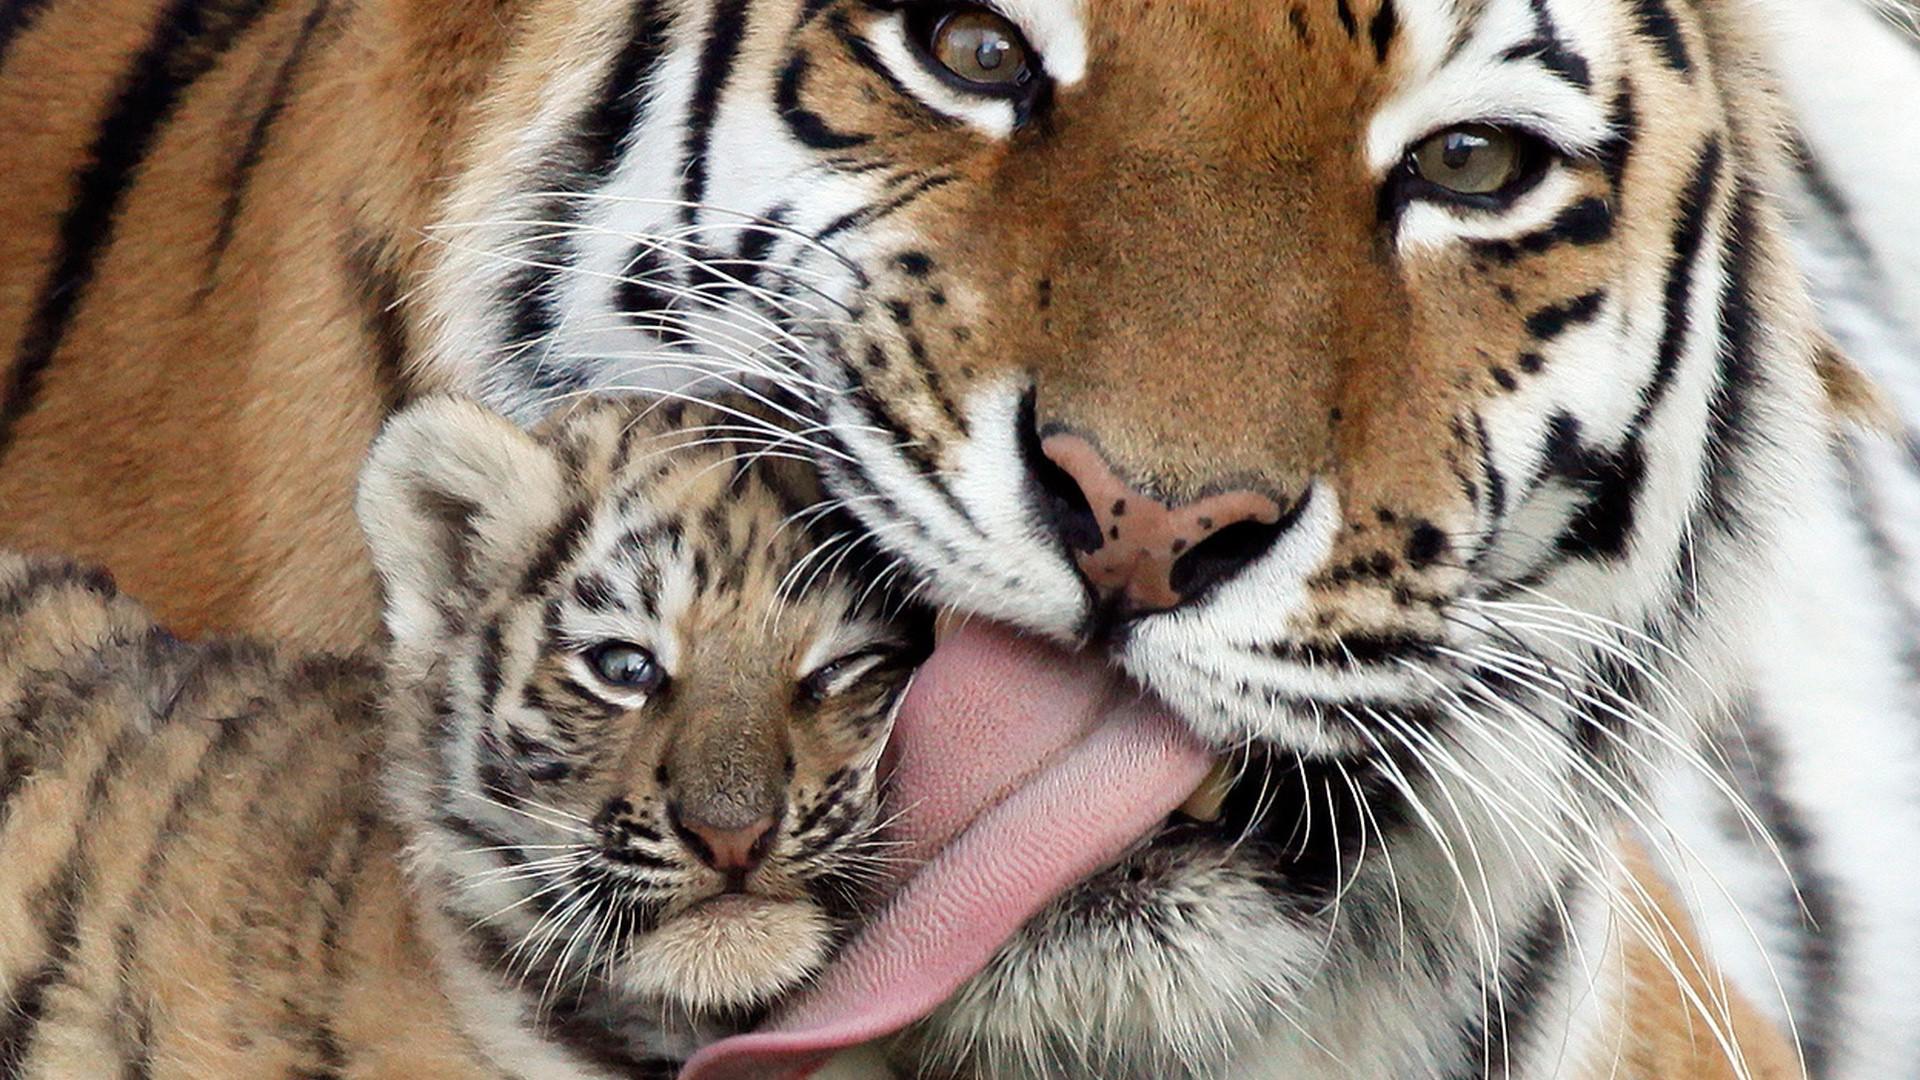 Baby Tigers Wallpapers